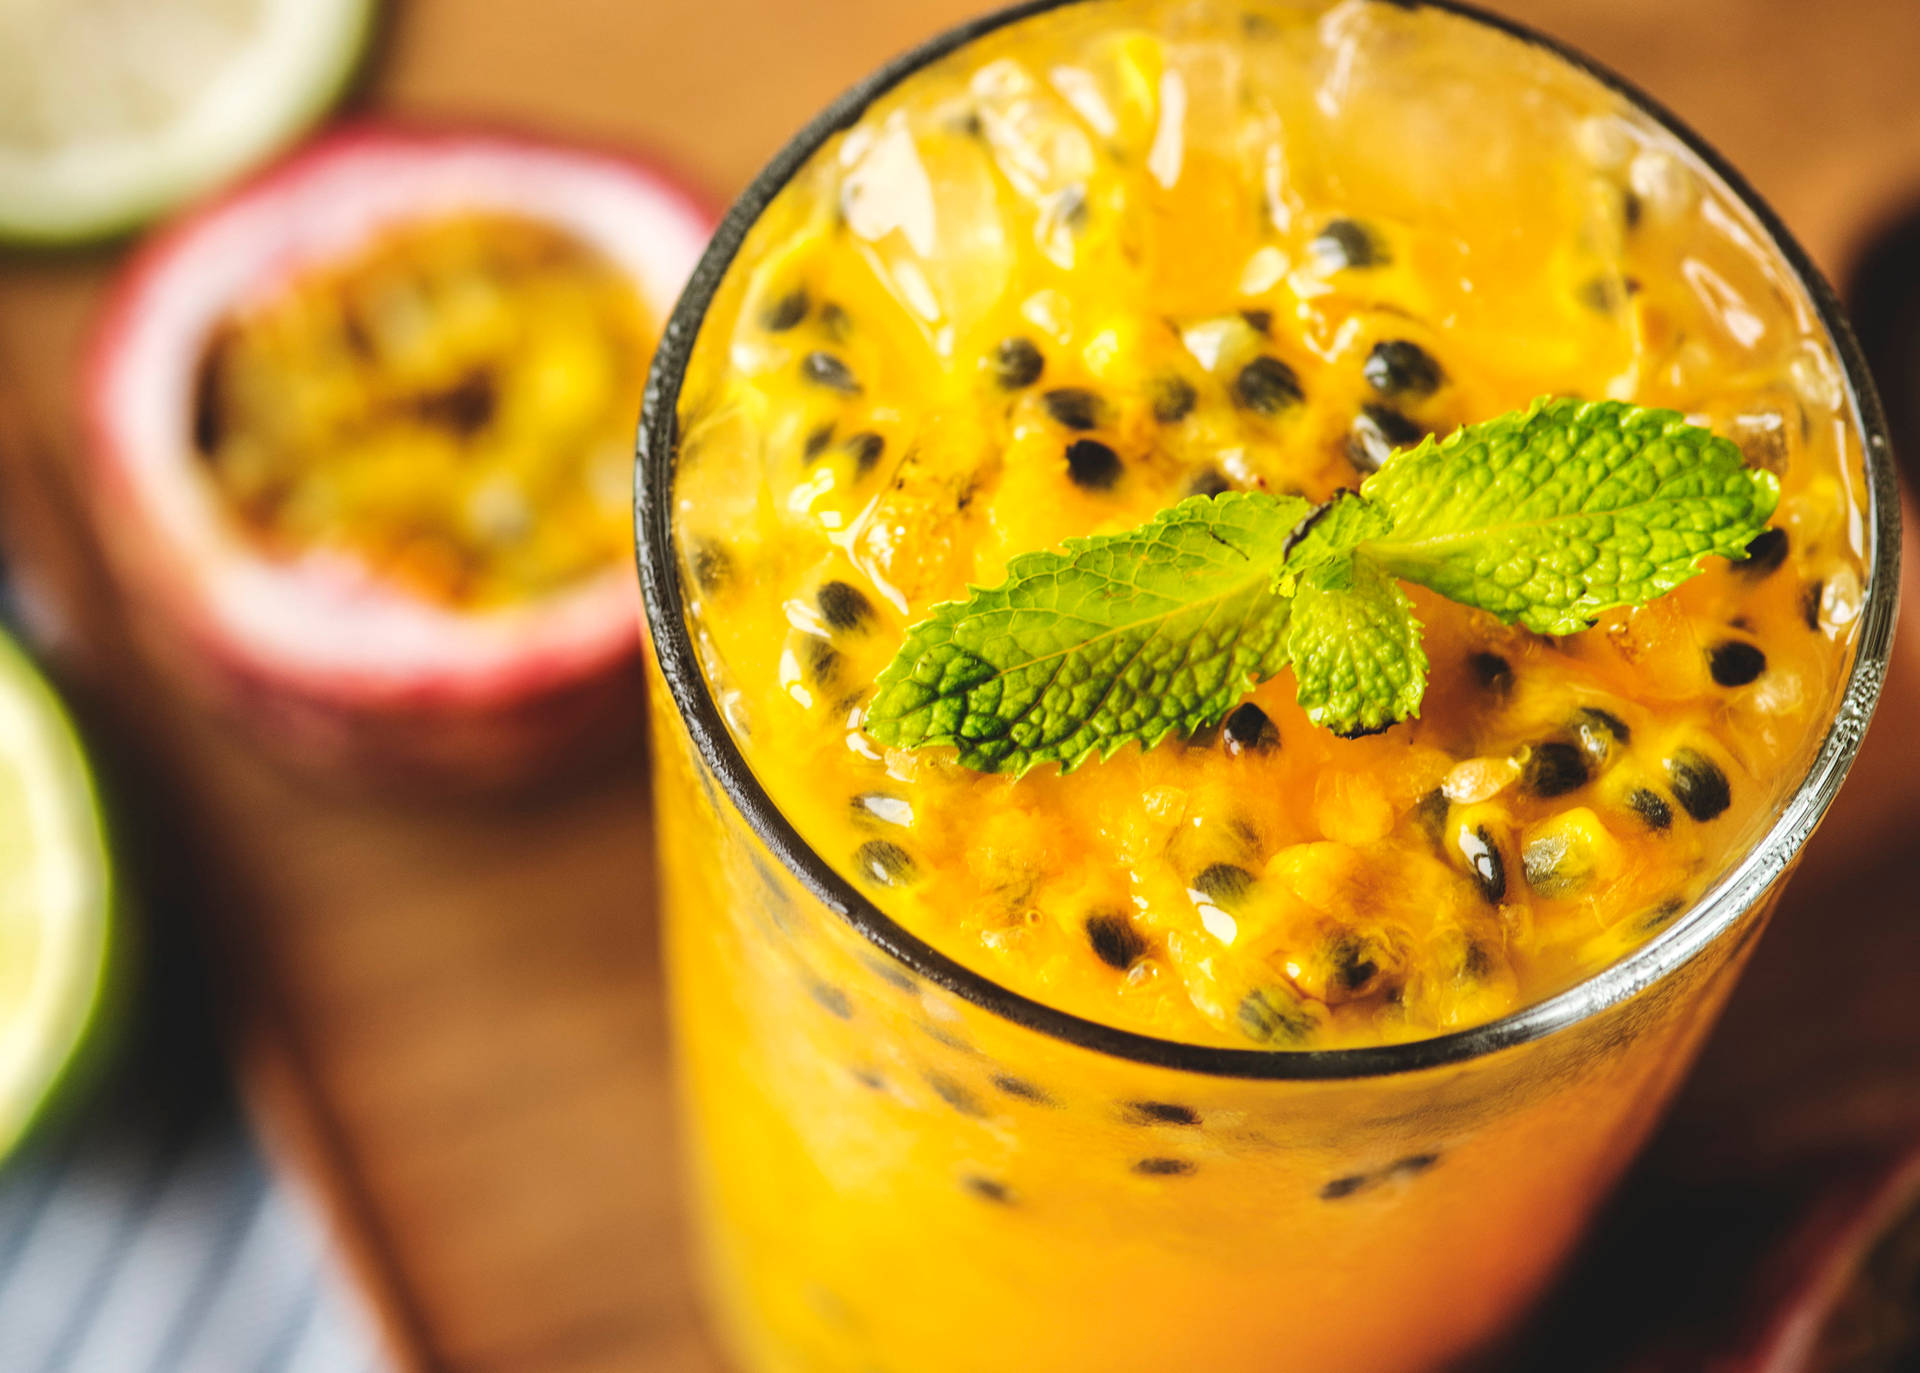 Refreshing Passion Fruit Drink Close Up Wallpaper